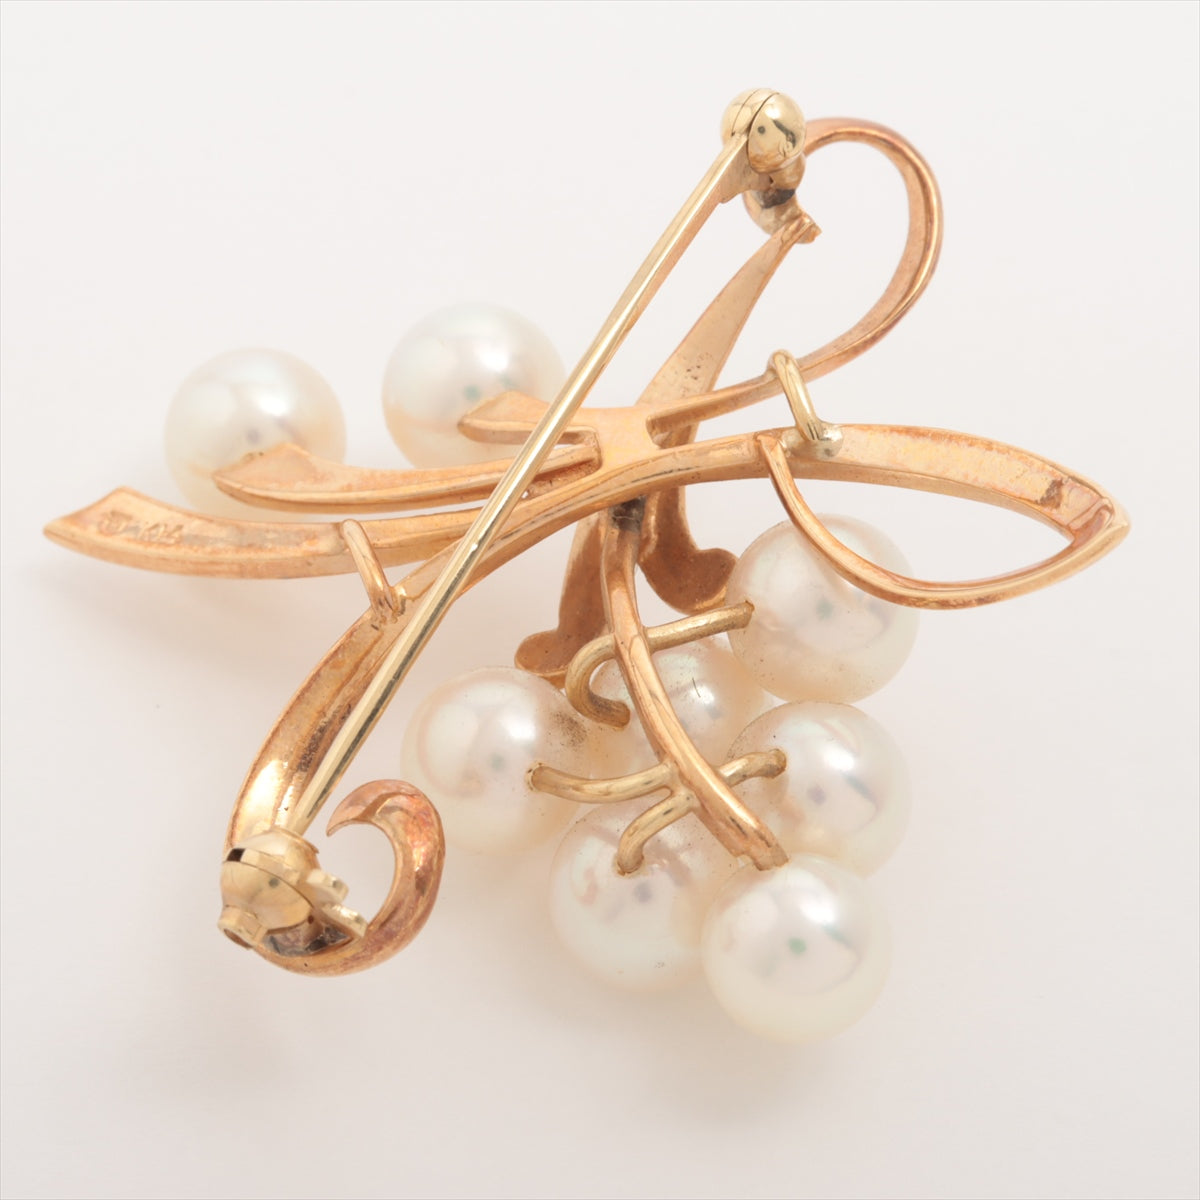 Mikimote Pearl Brooch K14 (YG) 8.8g about 6.5-7.0mm g-coloured hole-hole